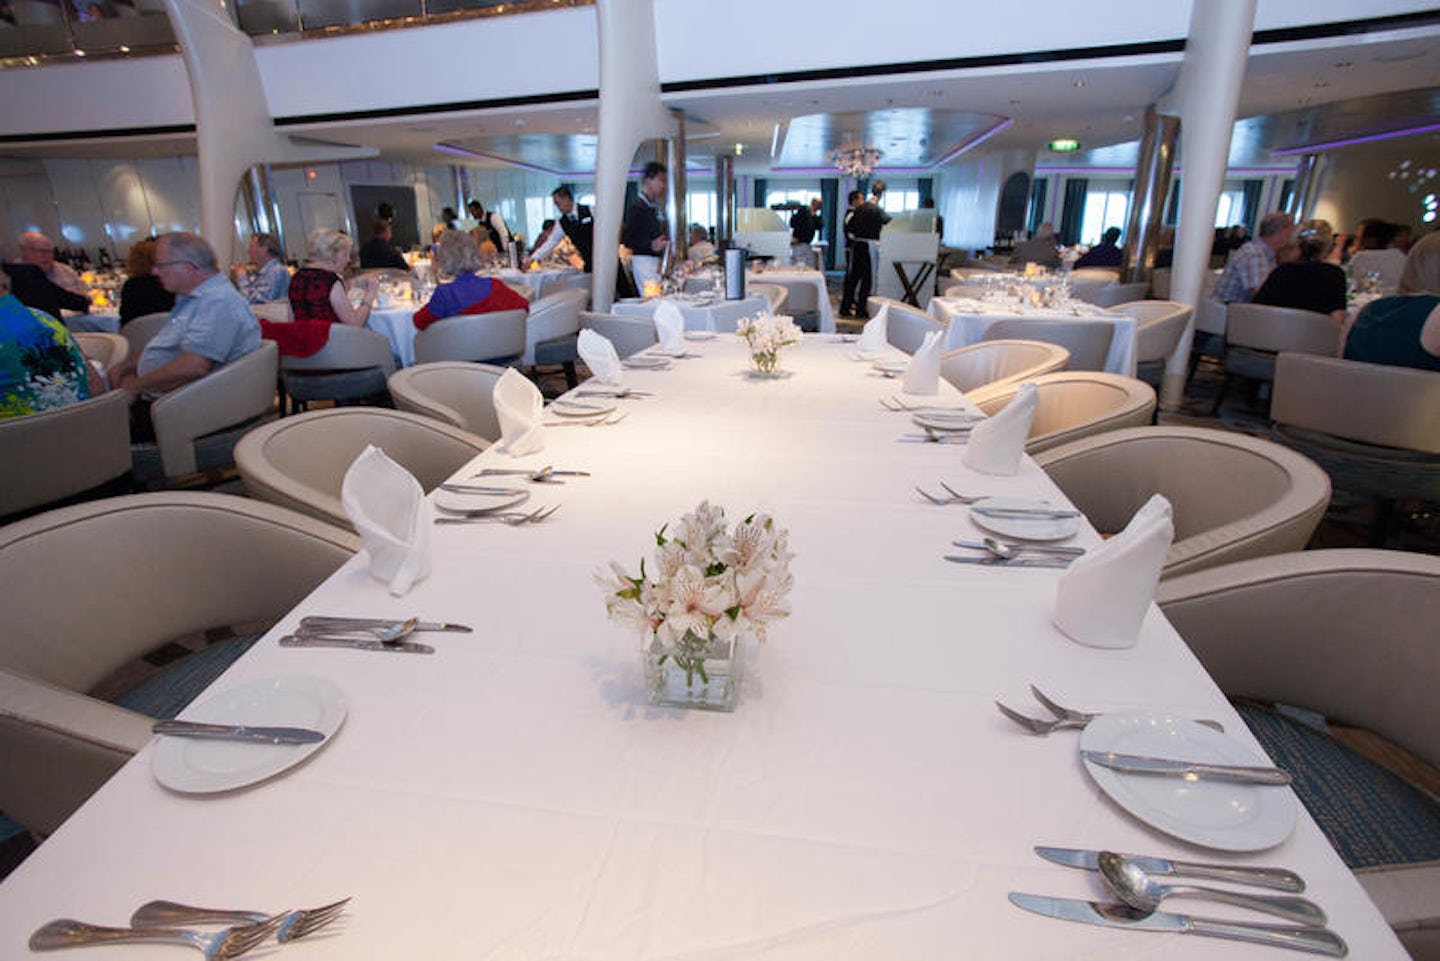 The Moonlight Sonata Dining Room on Celebrity Eclipse